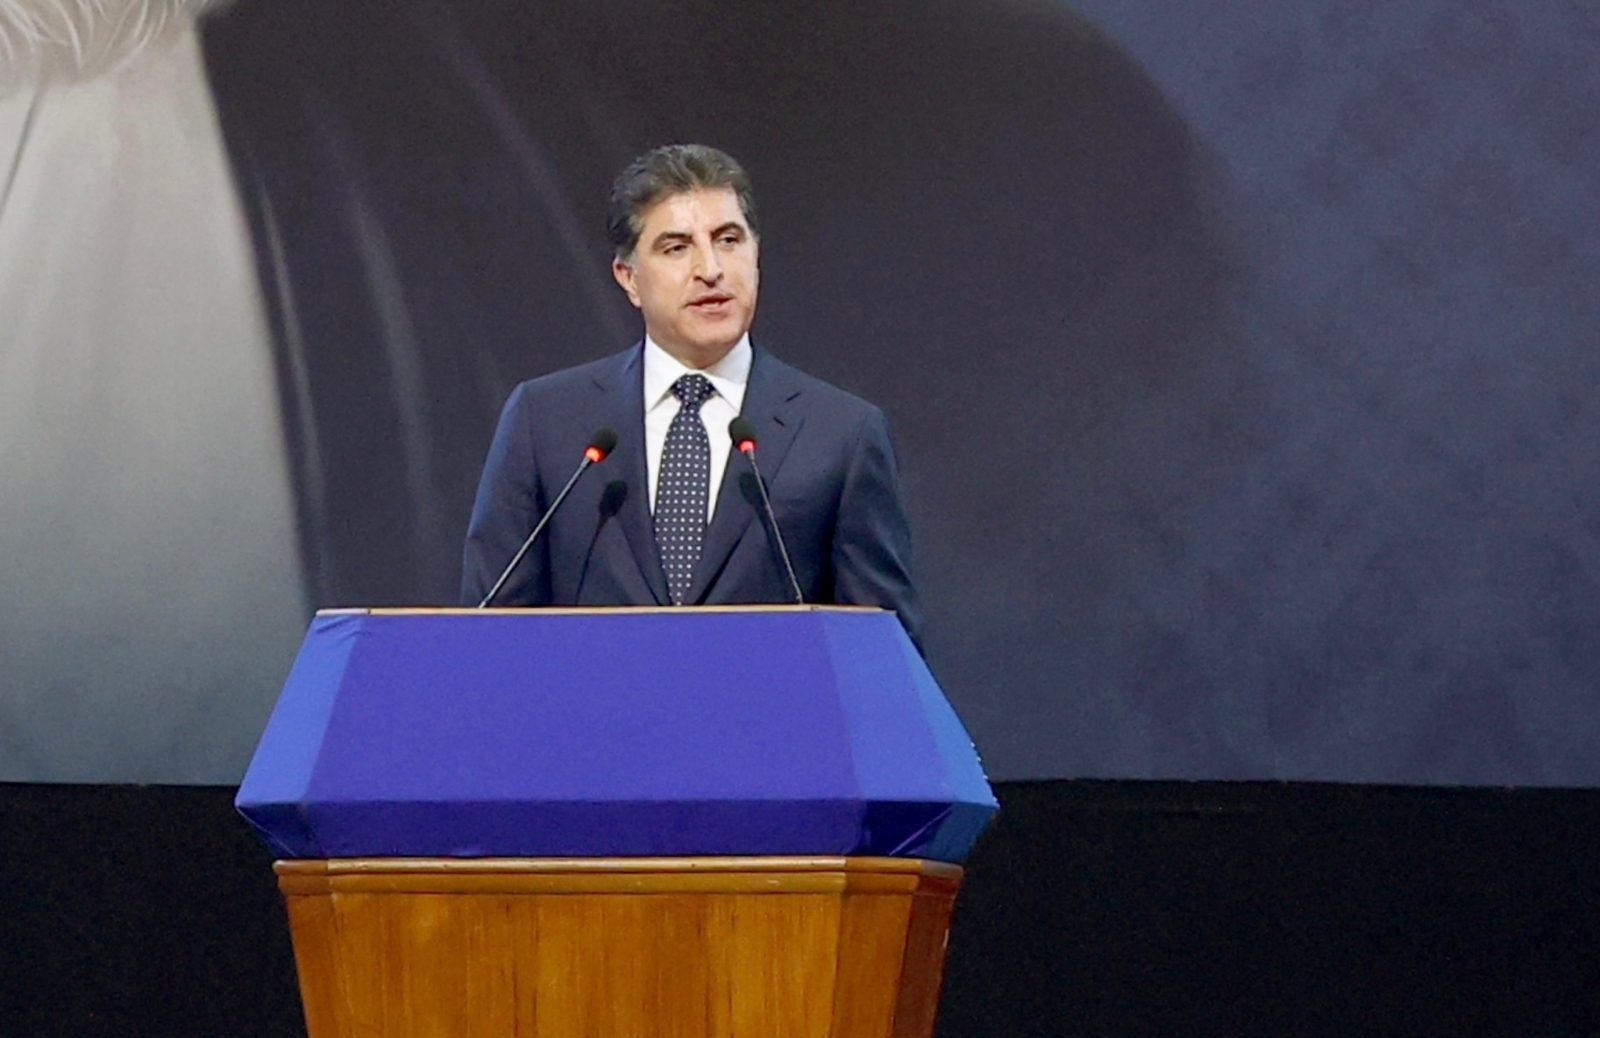 President Nechirvan Barzani: Iraq’s constitution must be fully implemented